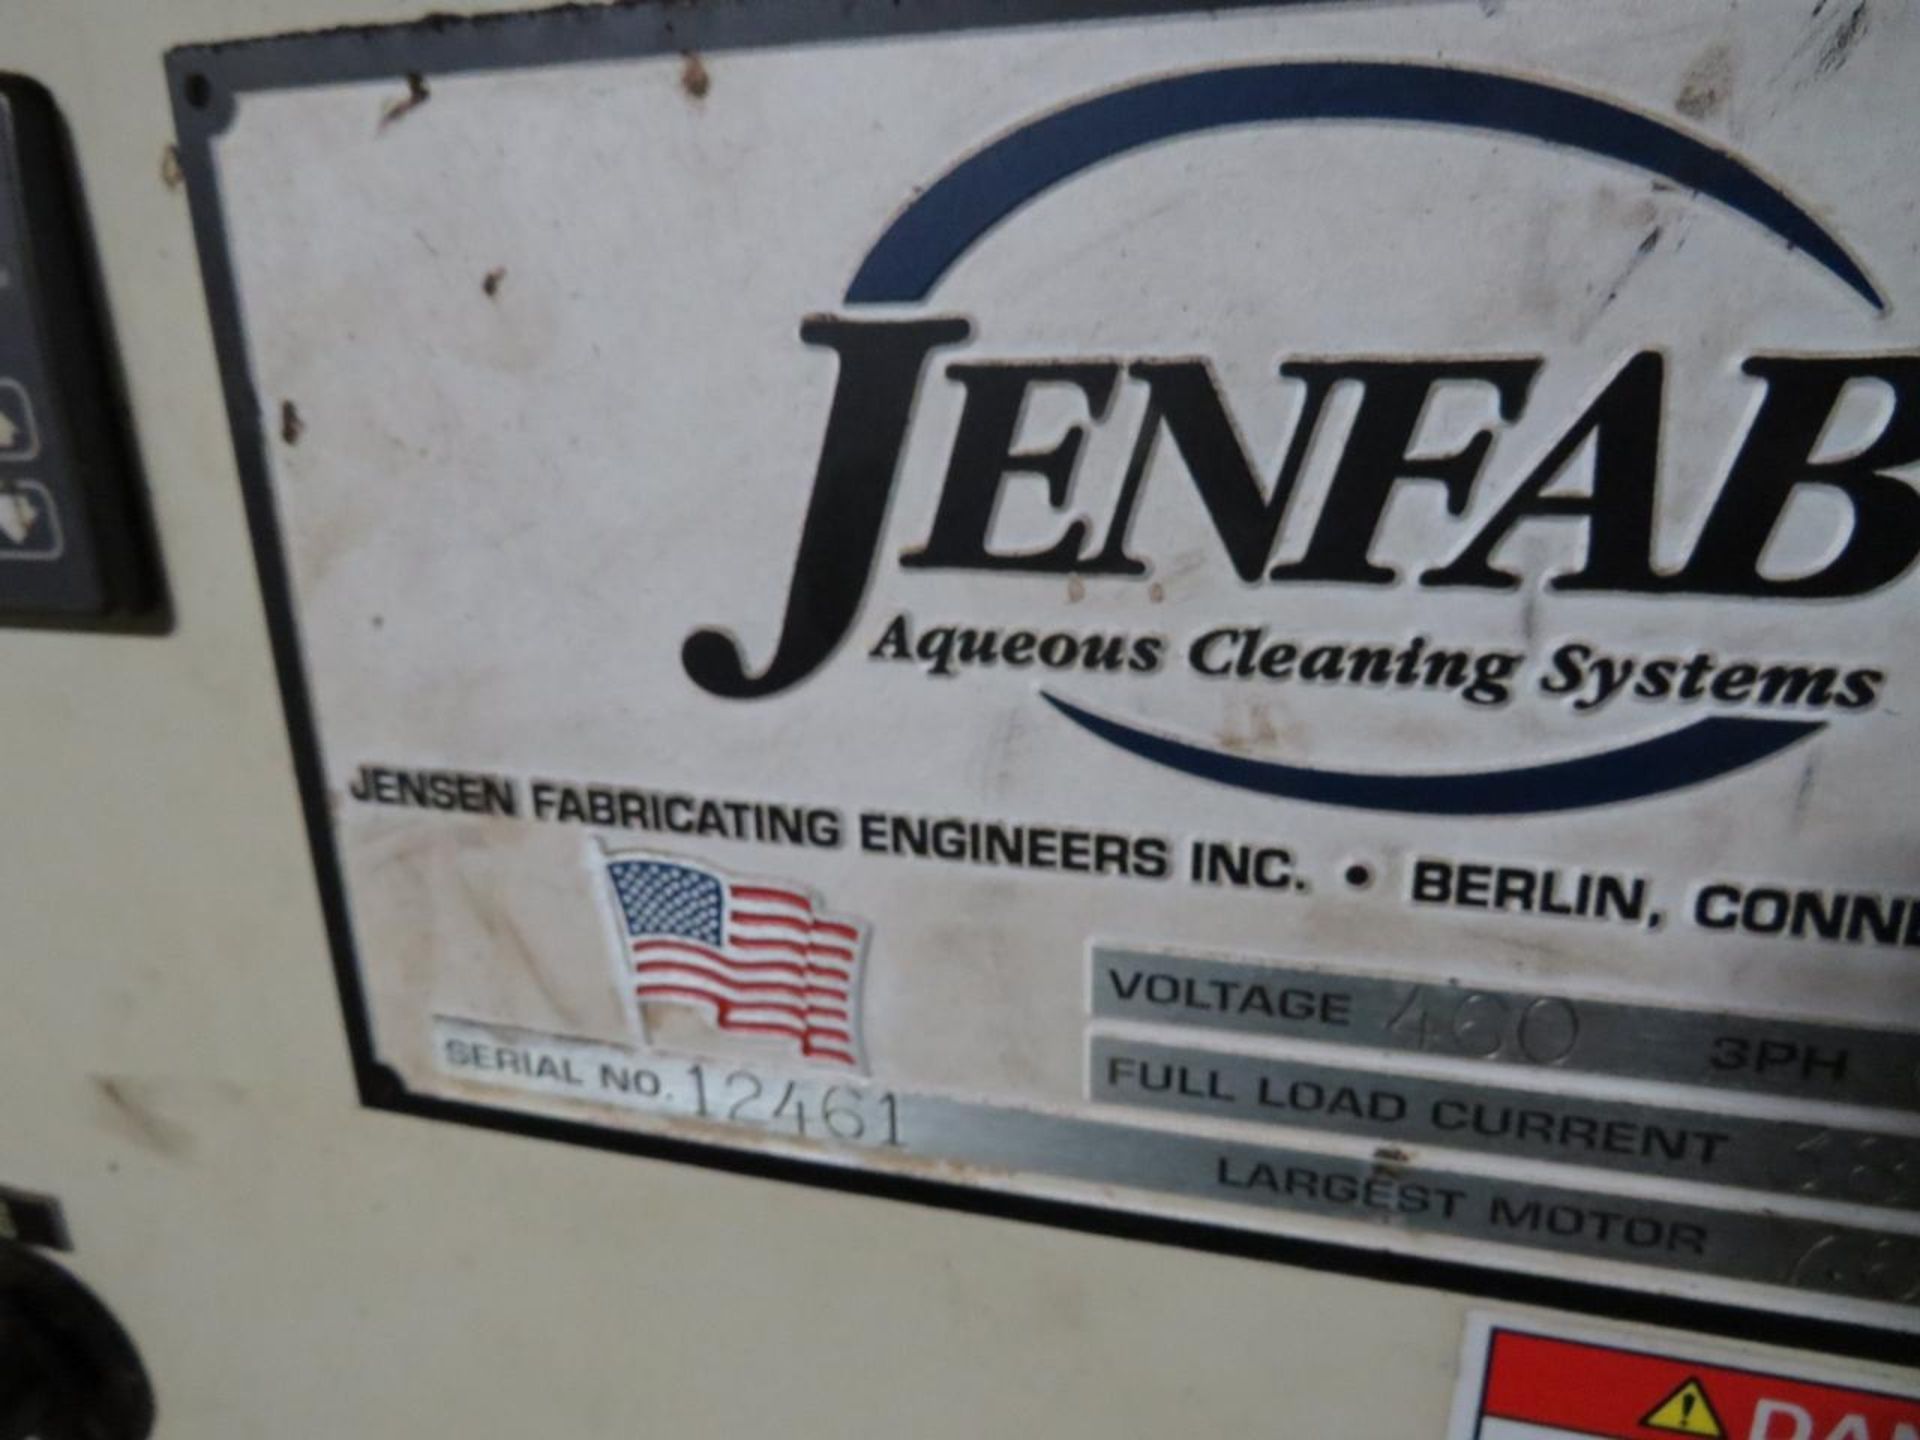 JenFab Aqueous Cleaning System - Image 7 of 11